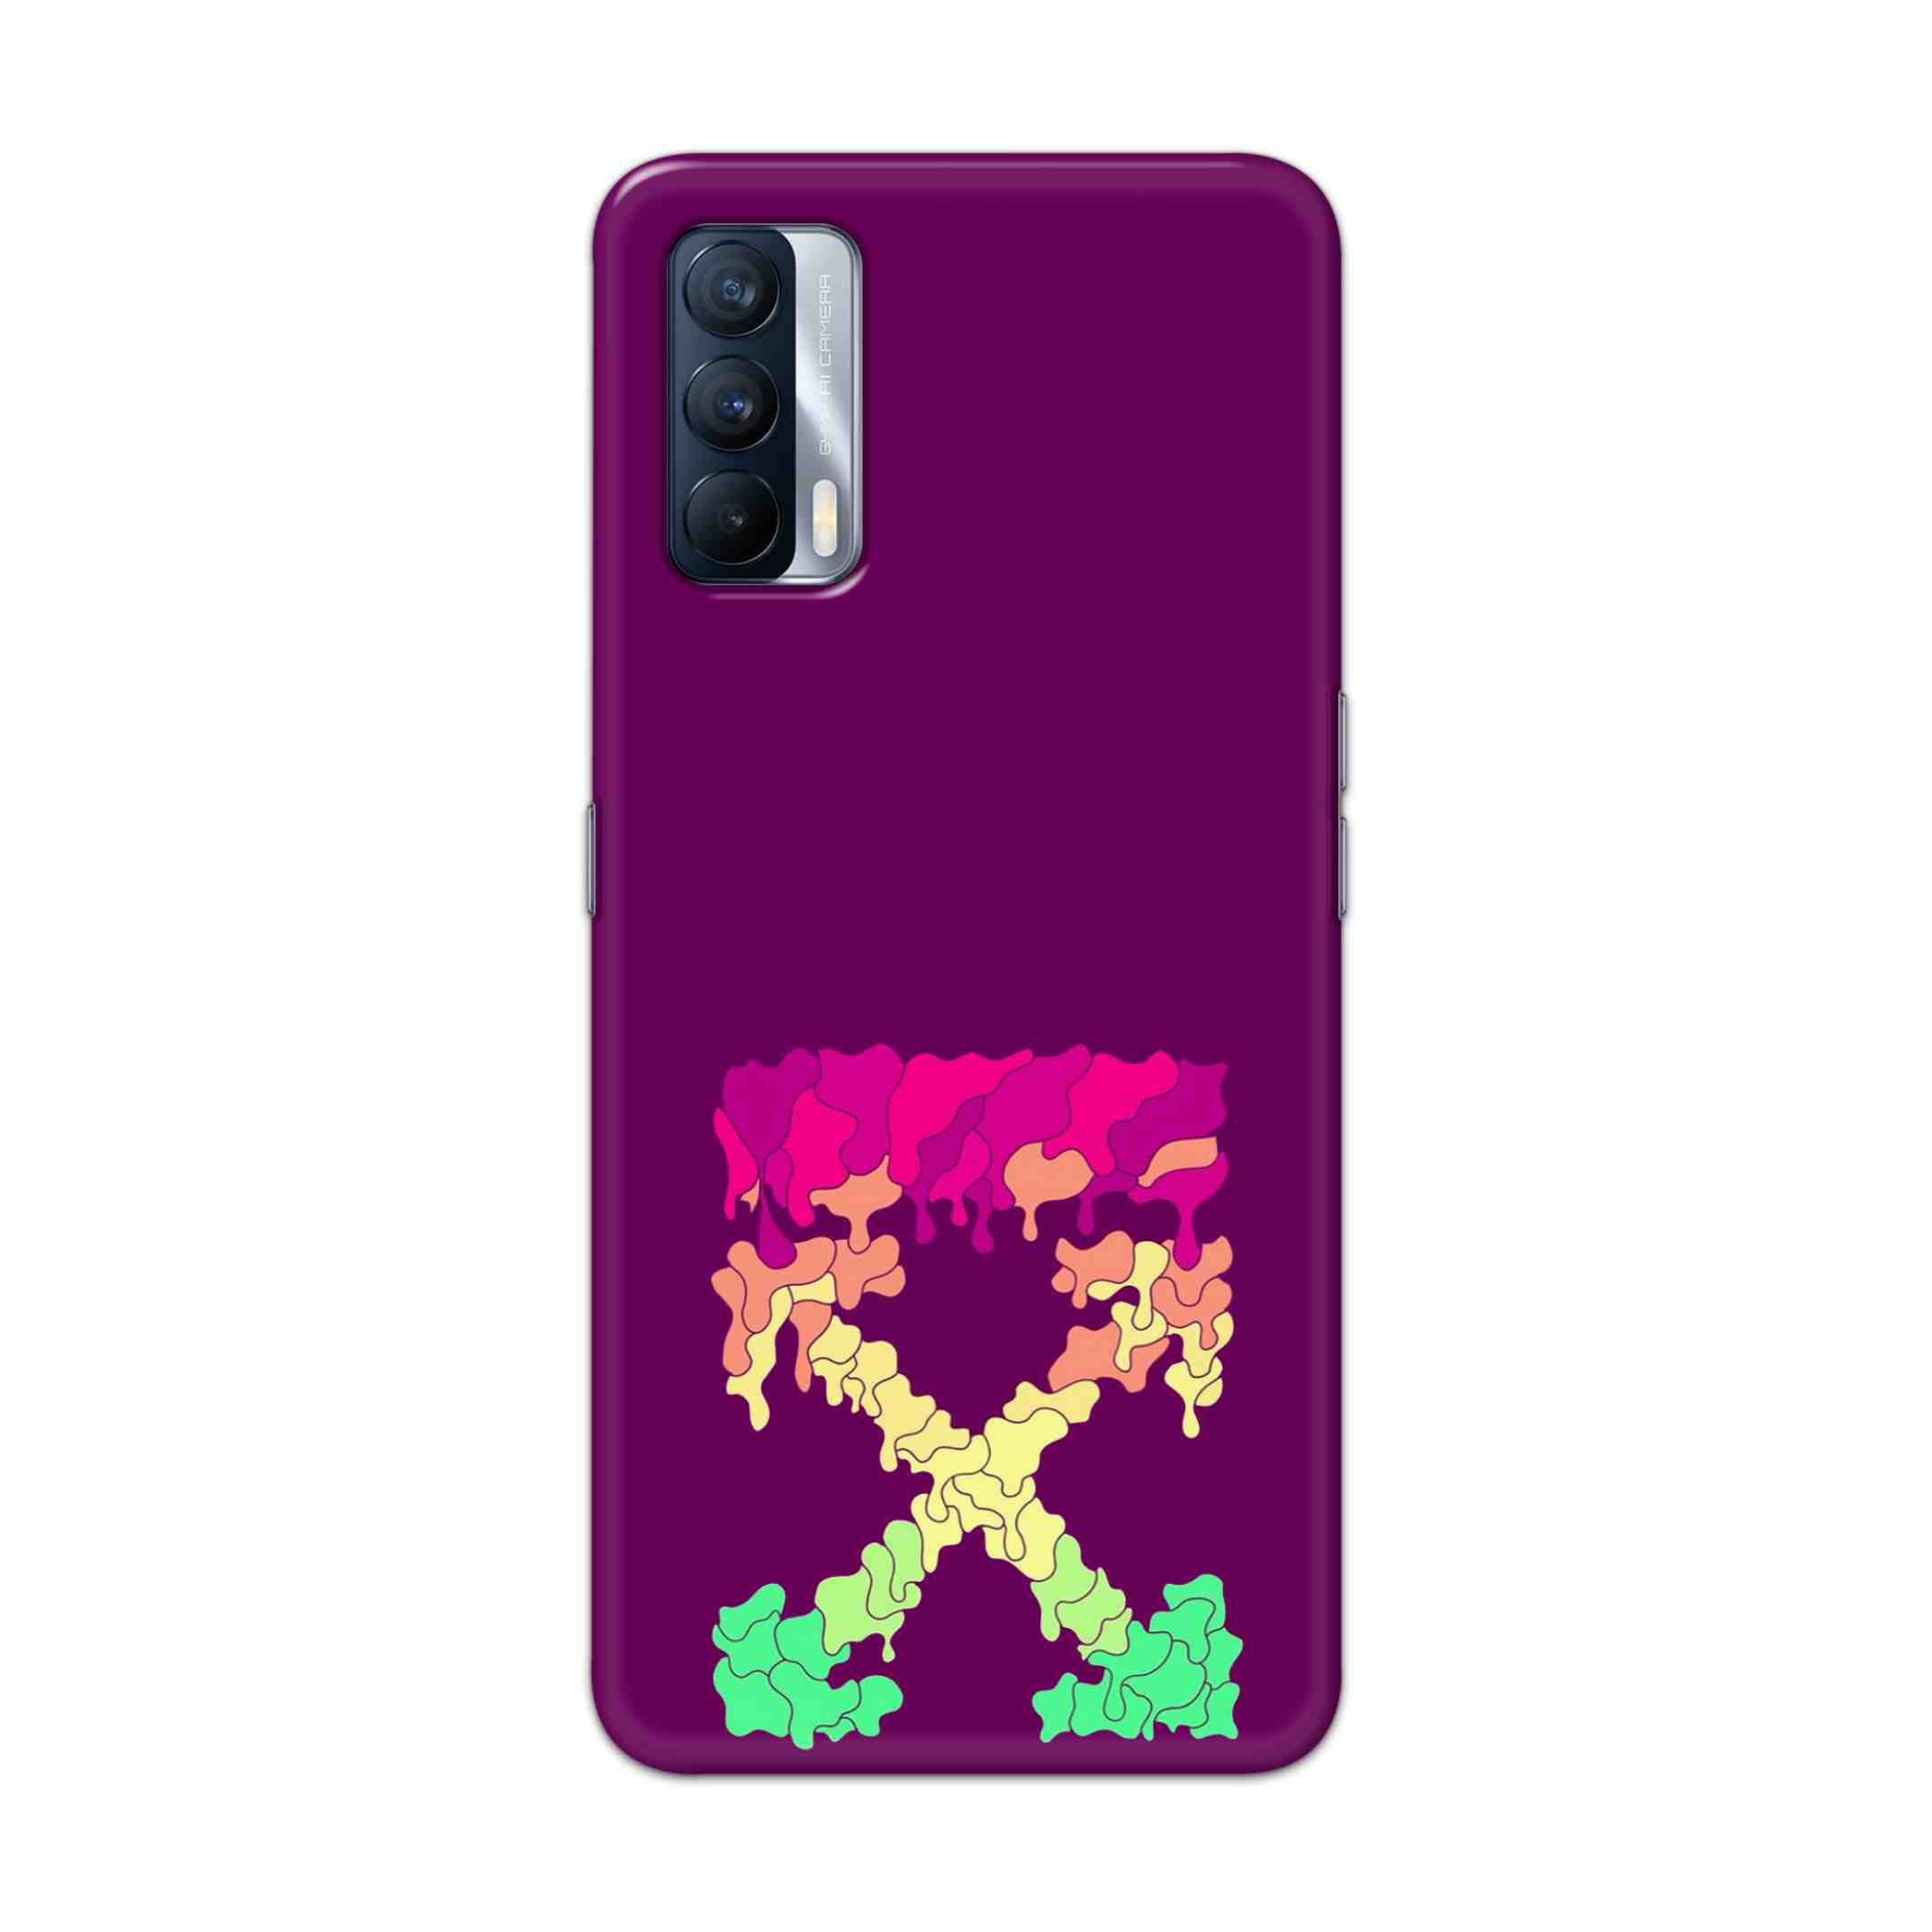 Buy X.O Hard Back Mobile Phone Case Cover For Realme X7 Online